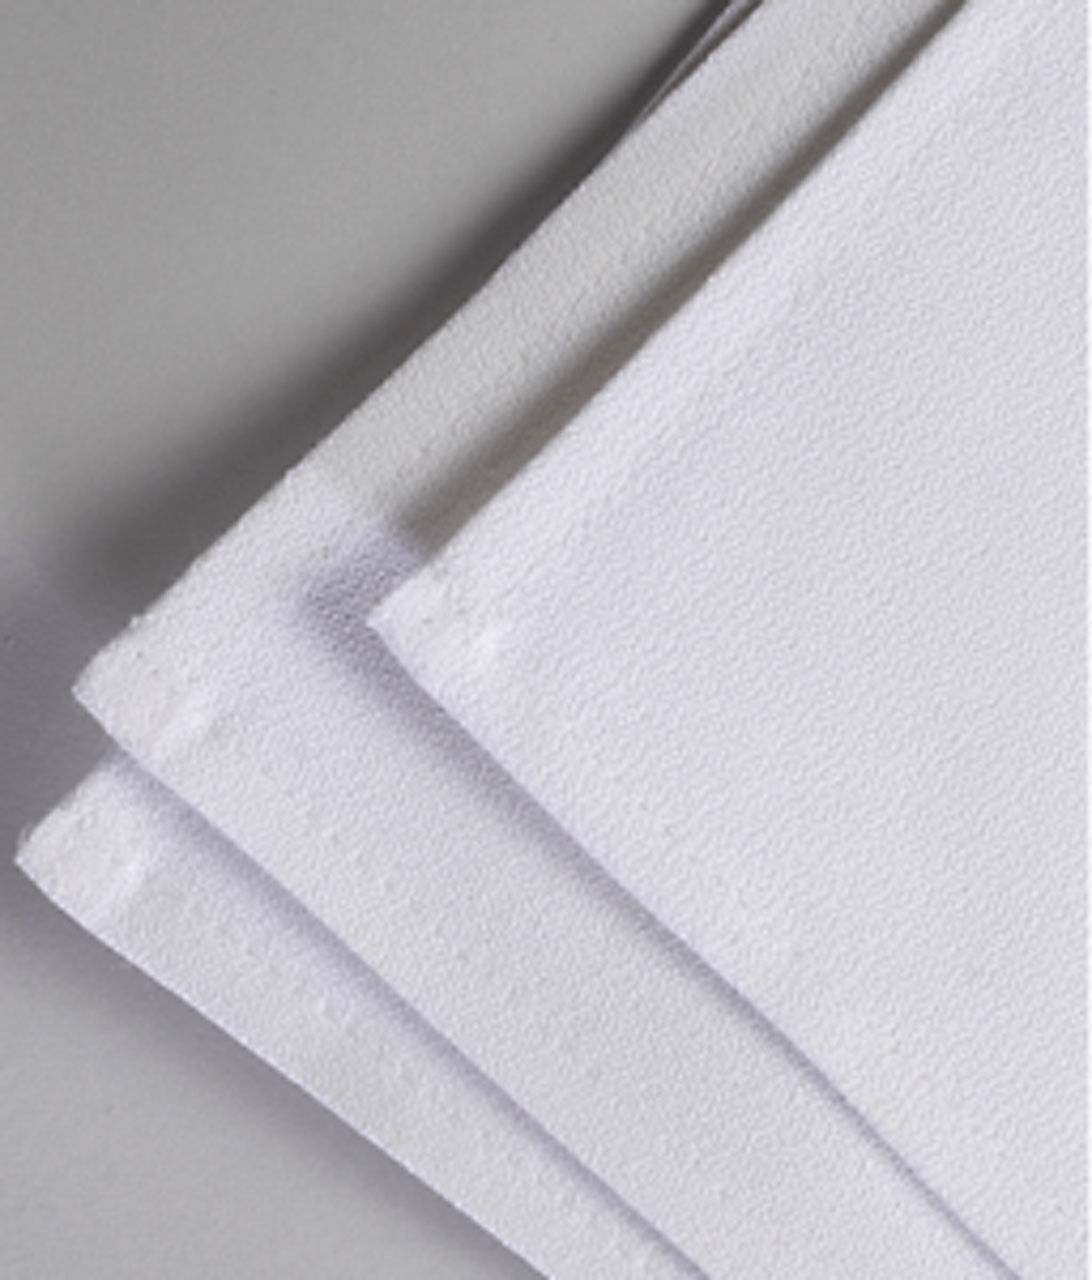 What is better cotton or linen napkins?